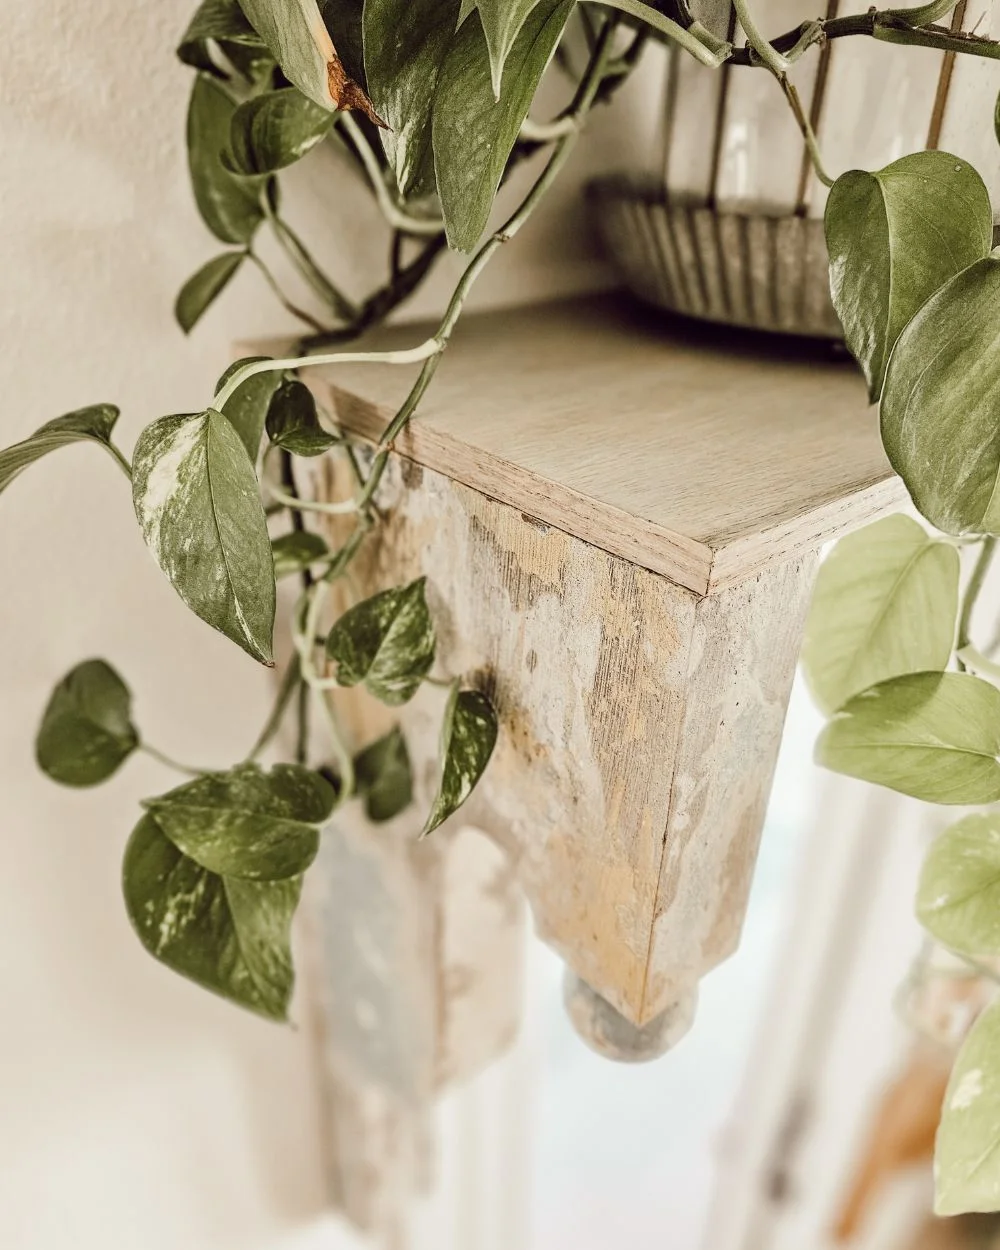 Easy DIY plant shelf made with corbels and plywood